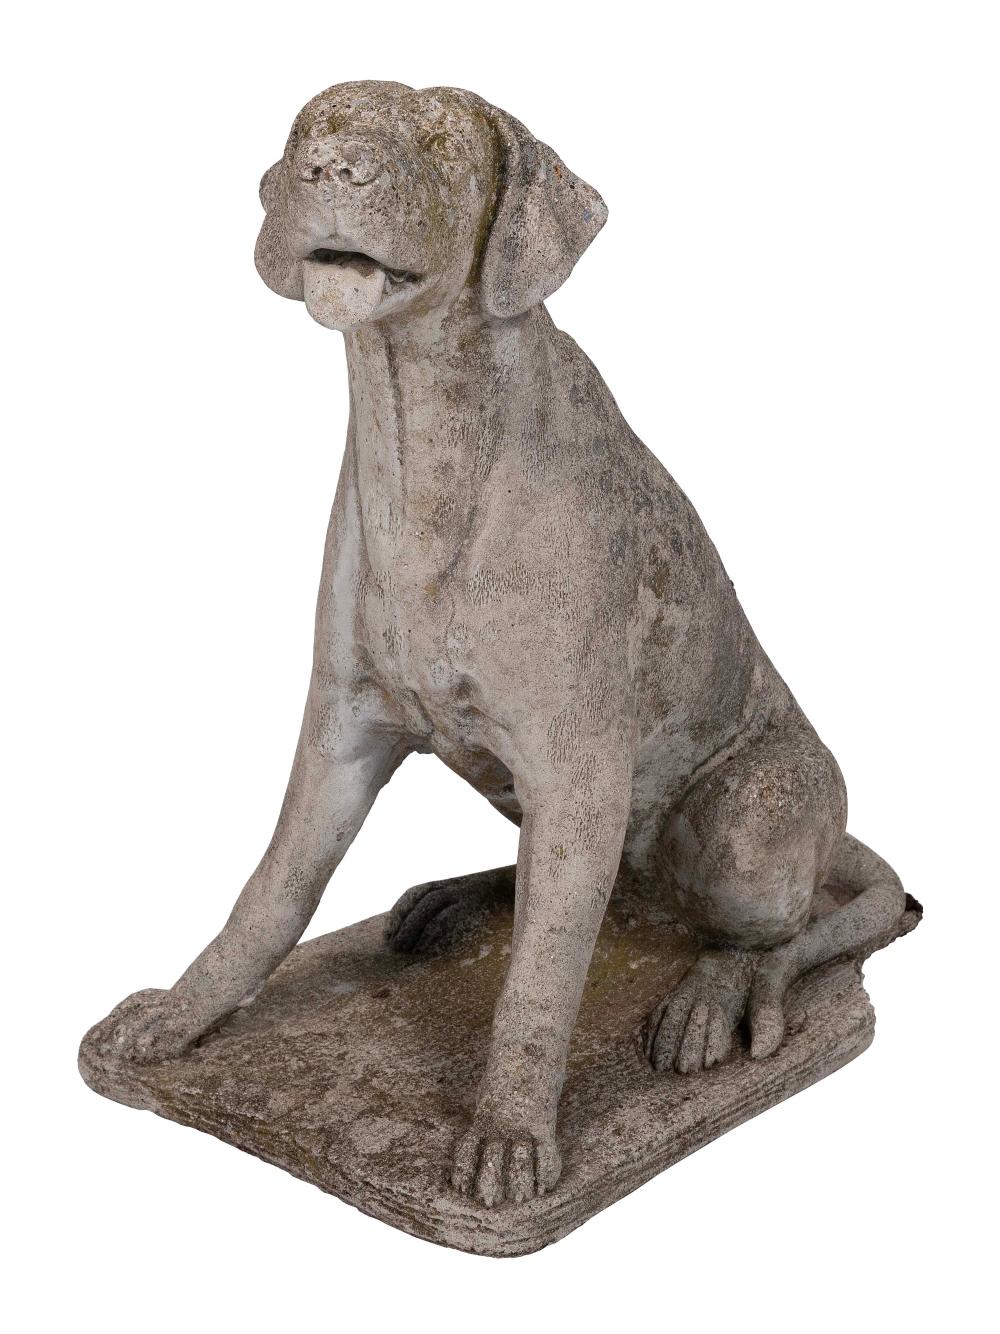 GARDEN STATUE OF A SEATED DOG 20TH